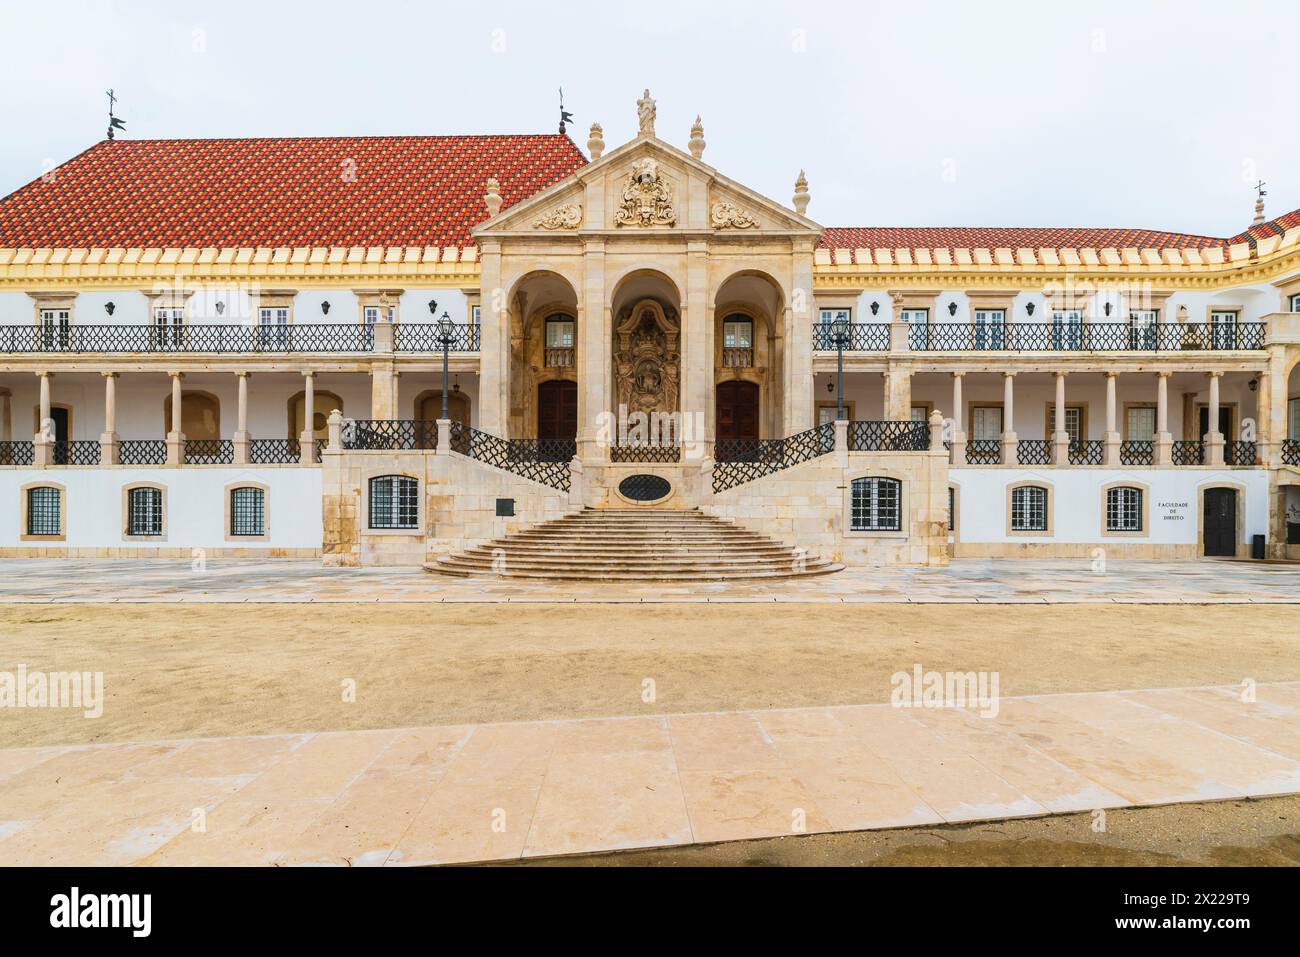 The University of Coimbra in Coimbra, Portugal. Was established in Lisbon in 1290, it went through a number of relocations until moving permanently to Stock Photo